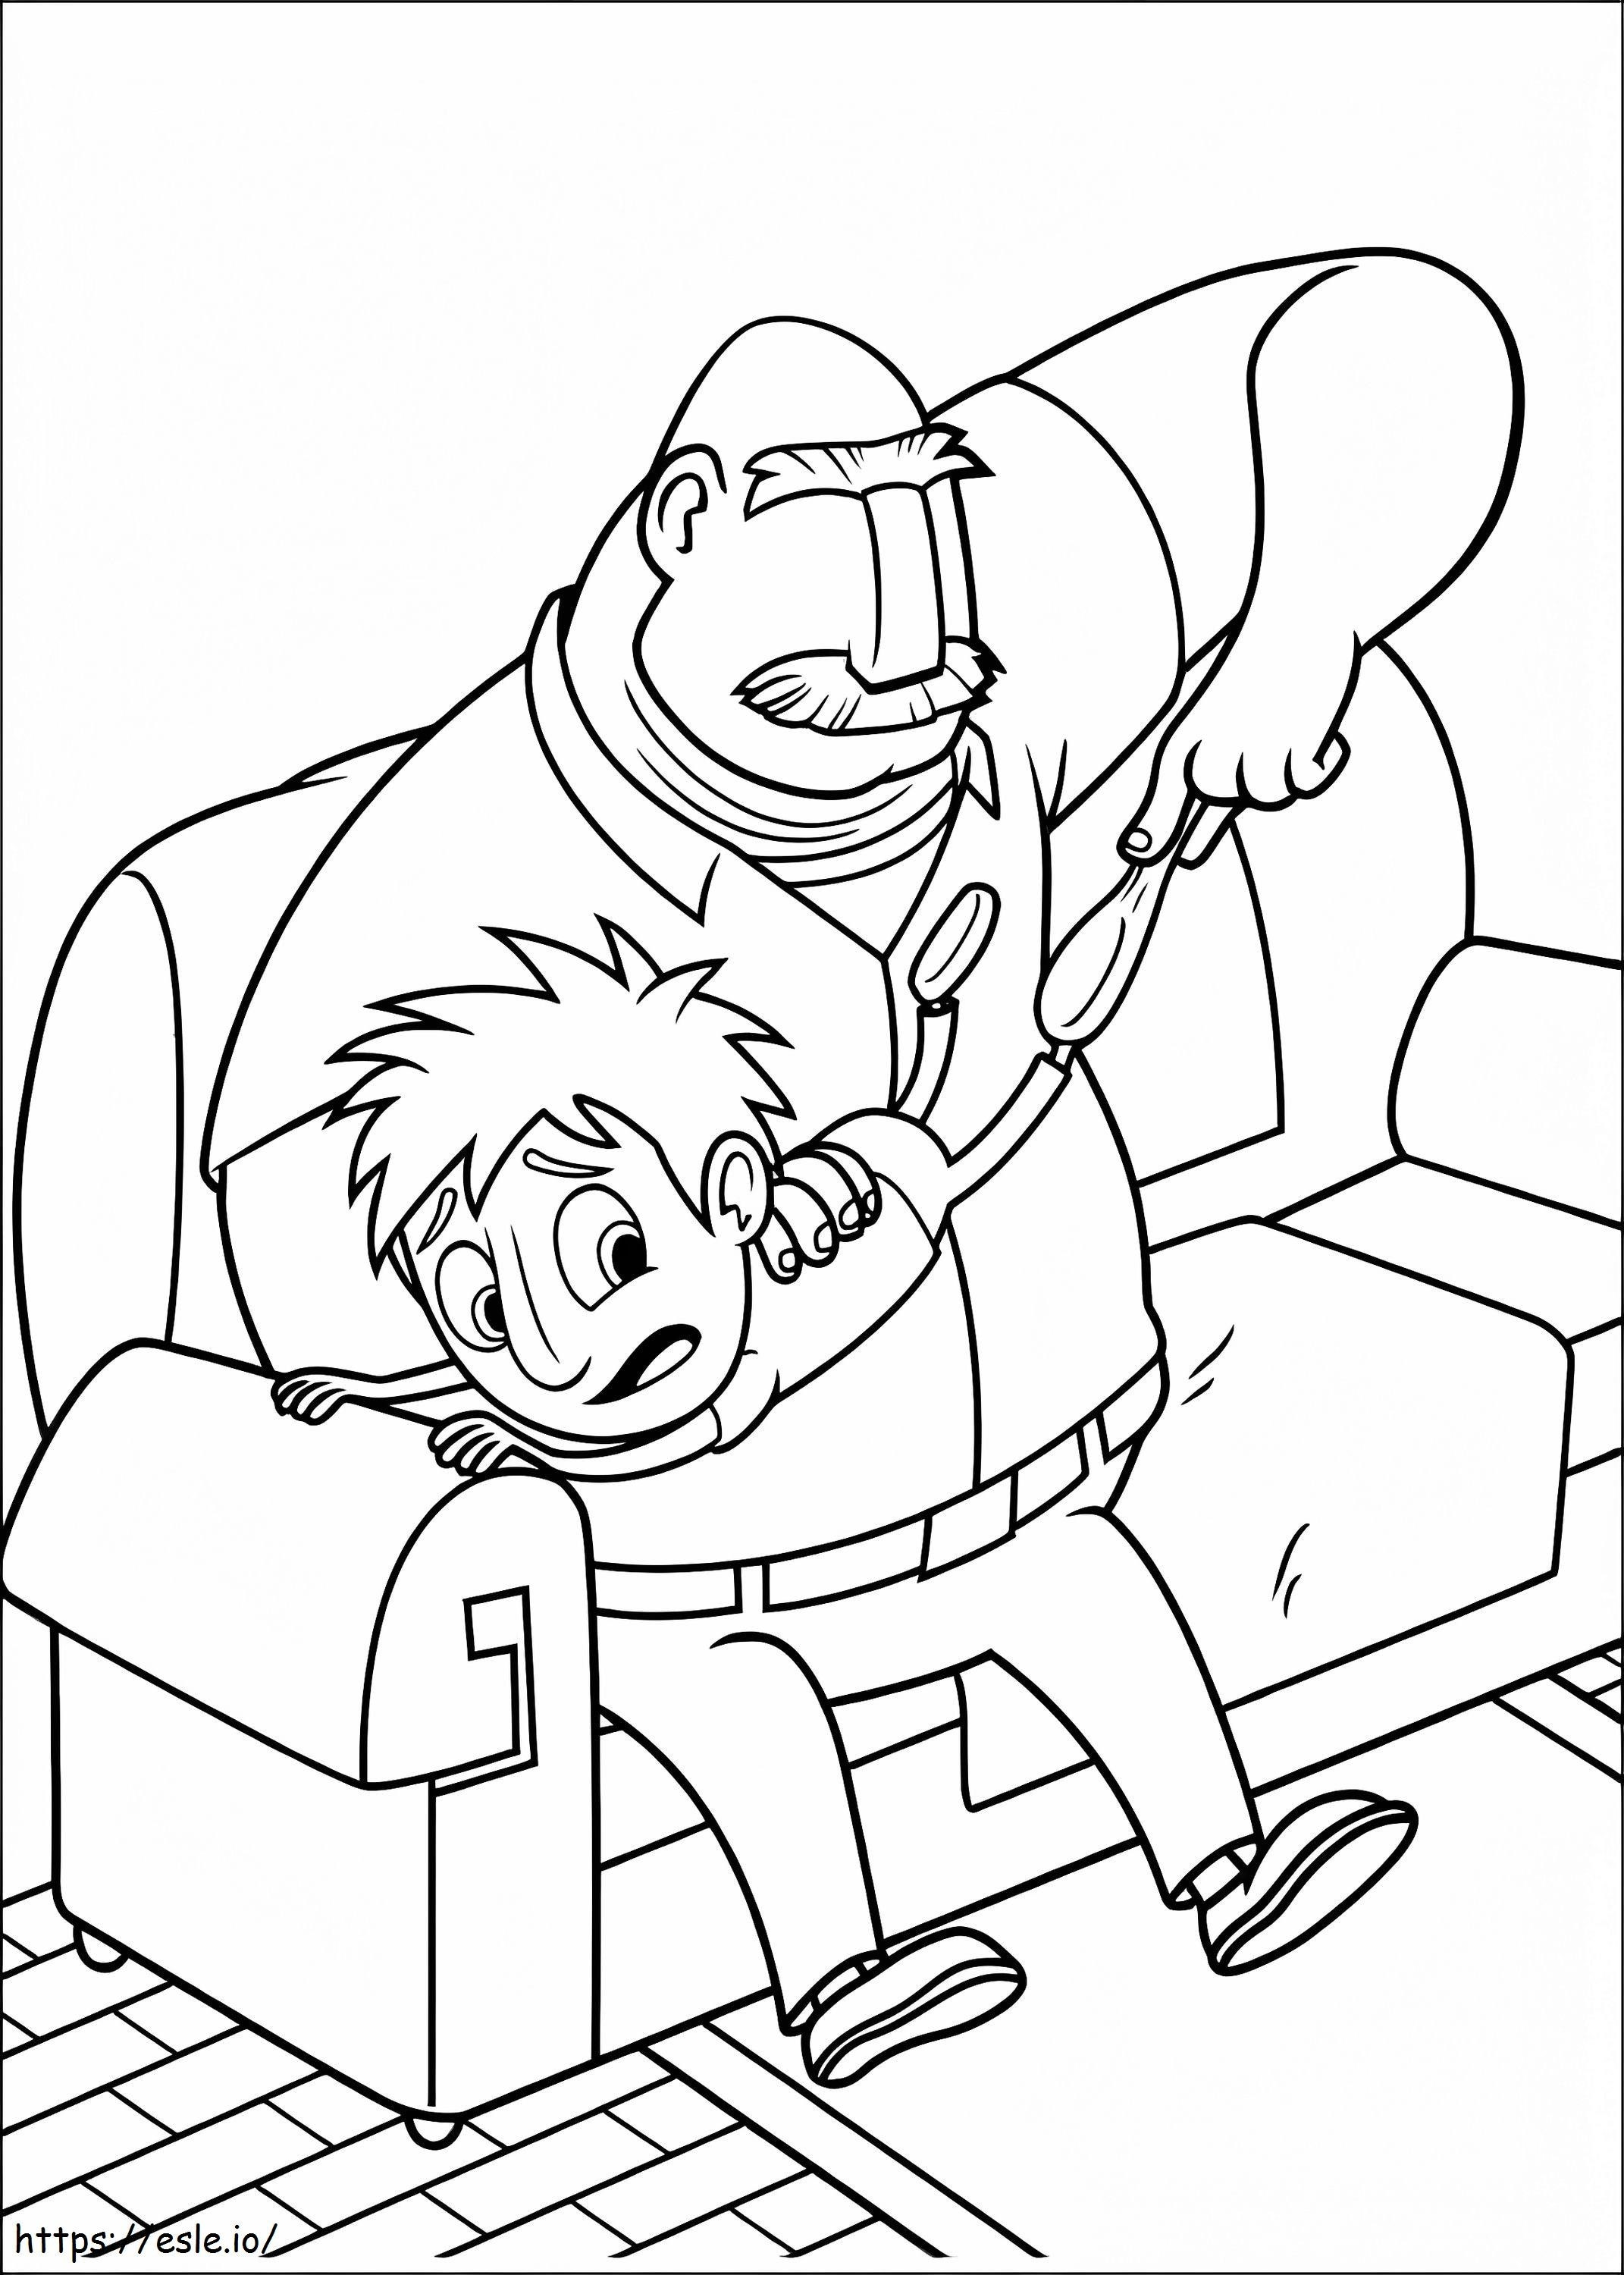 Cloudy With A Chance Of Meatballs 10 coloring page